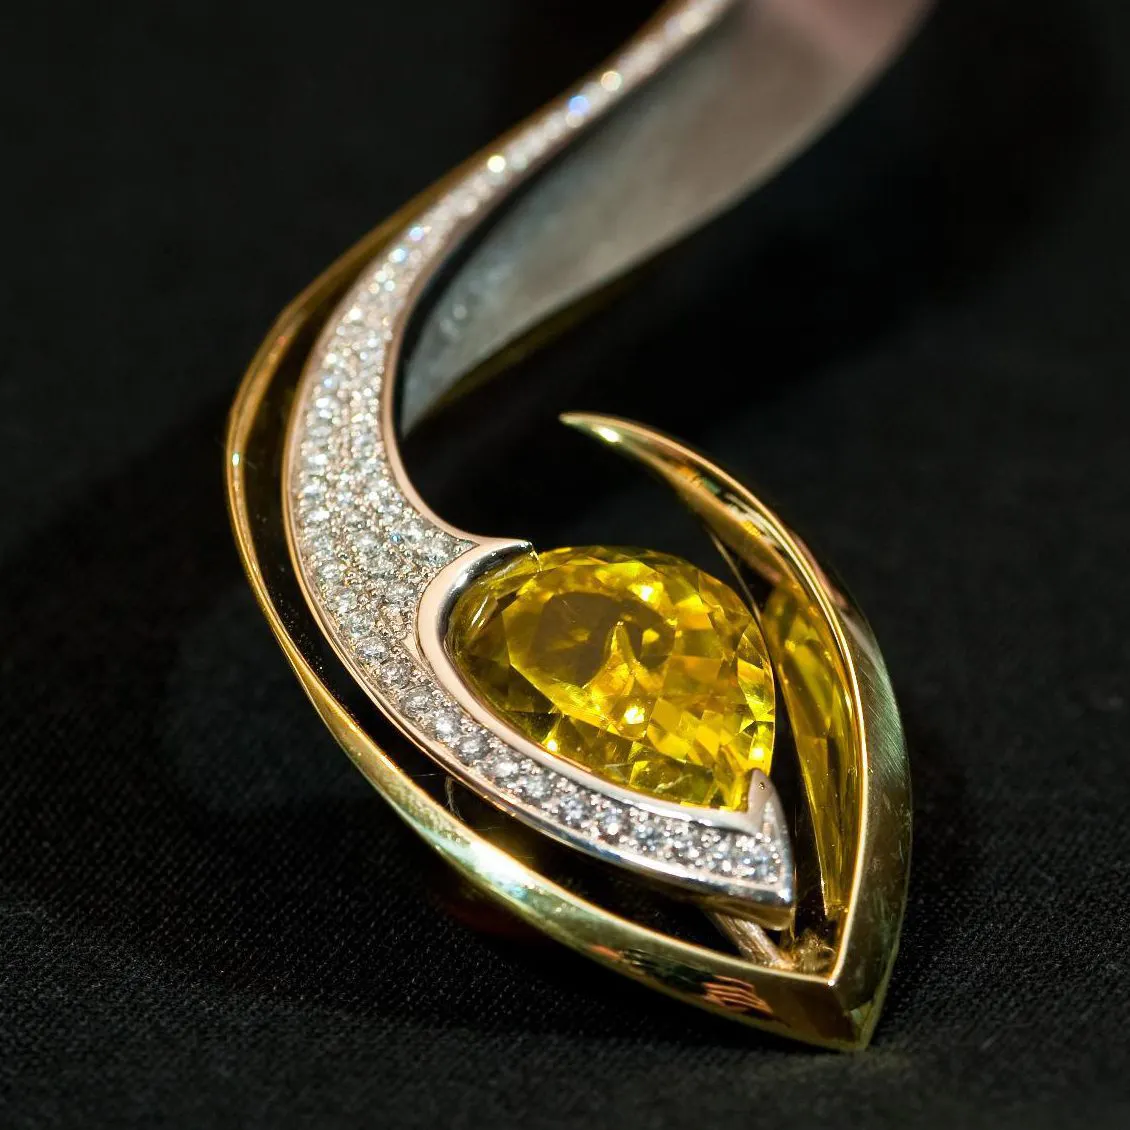 19 Yellow Gemstones (With 9 Best Gems for Rings!)